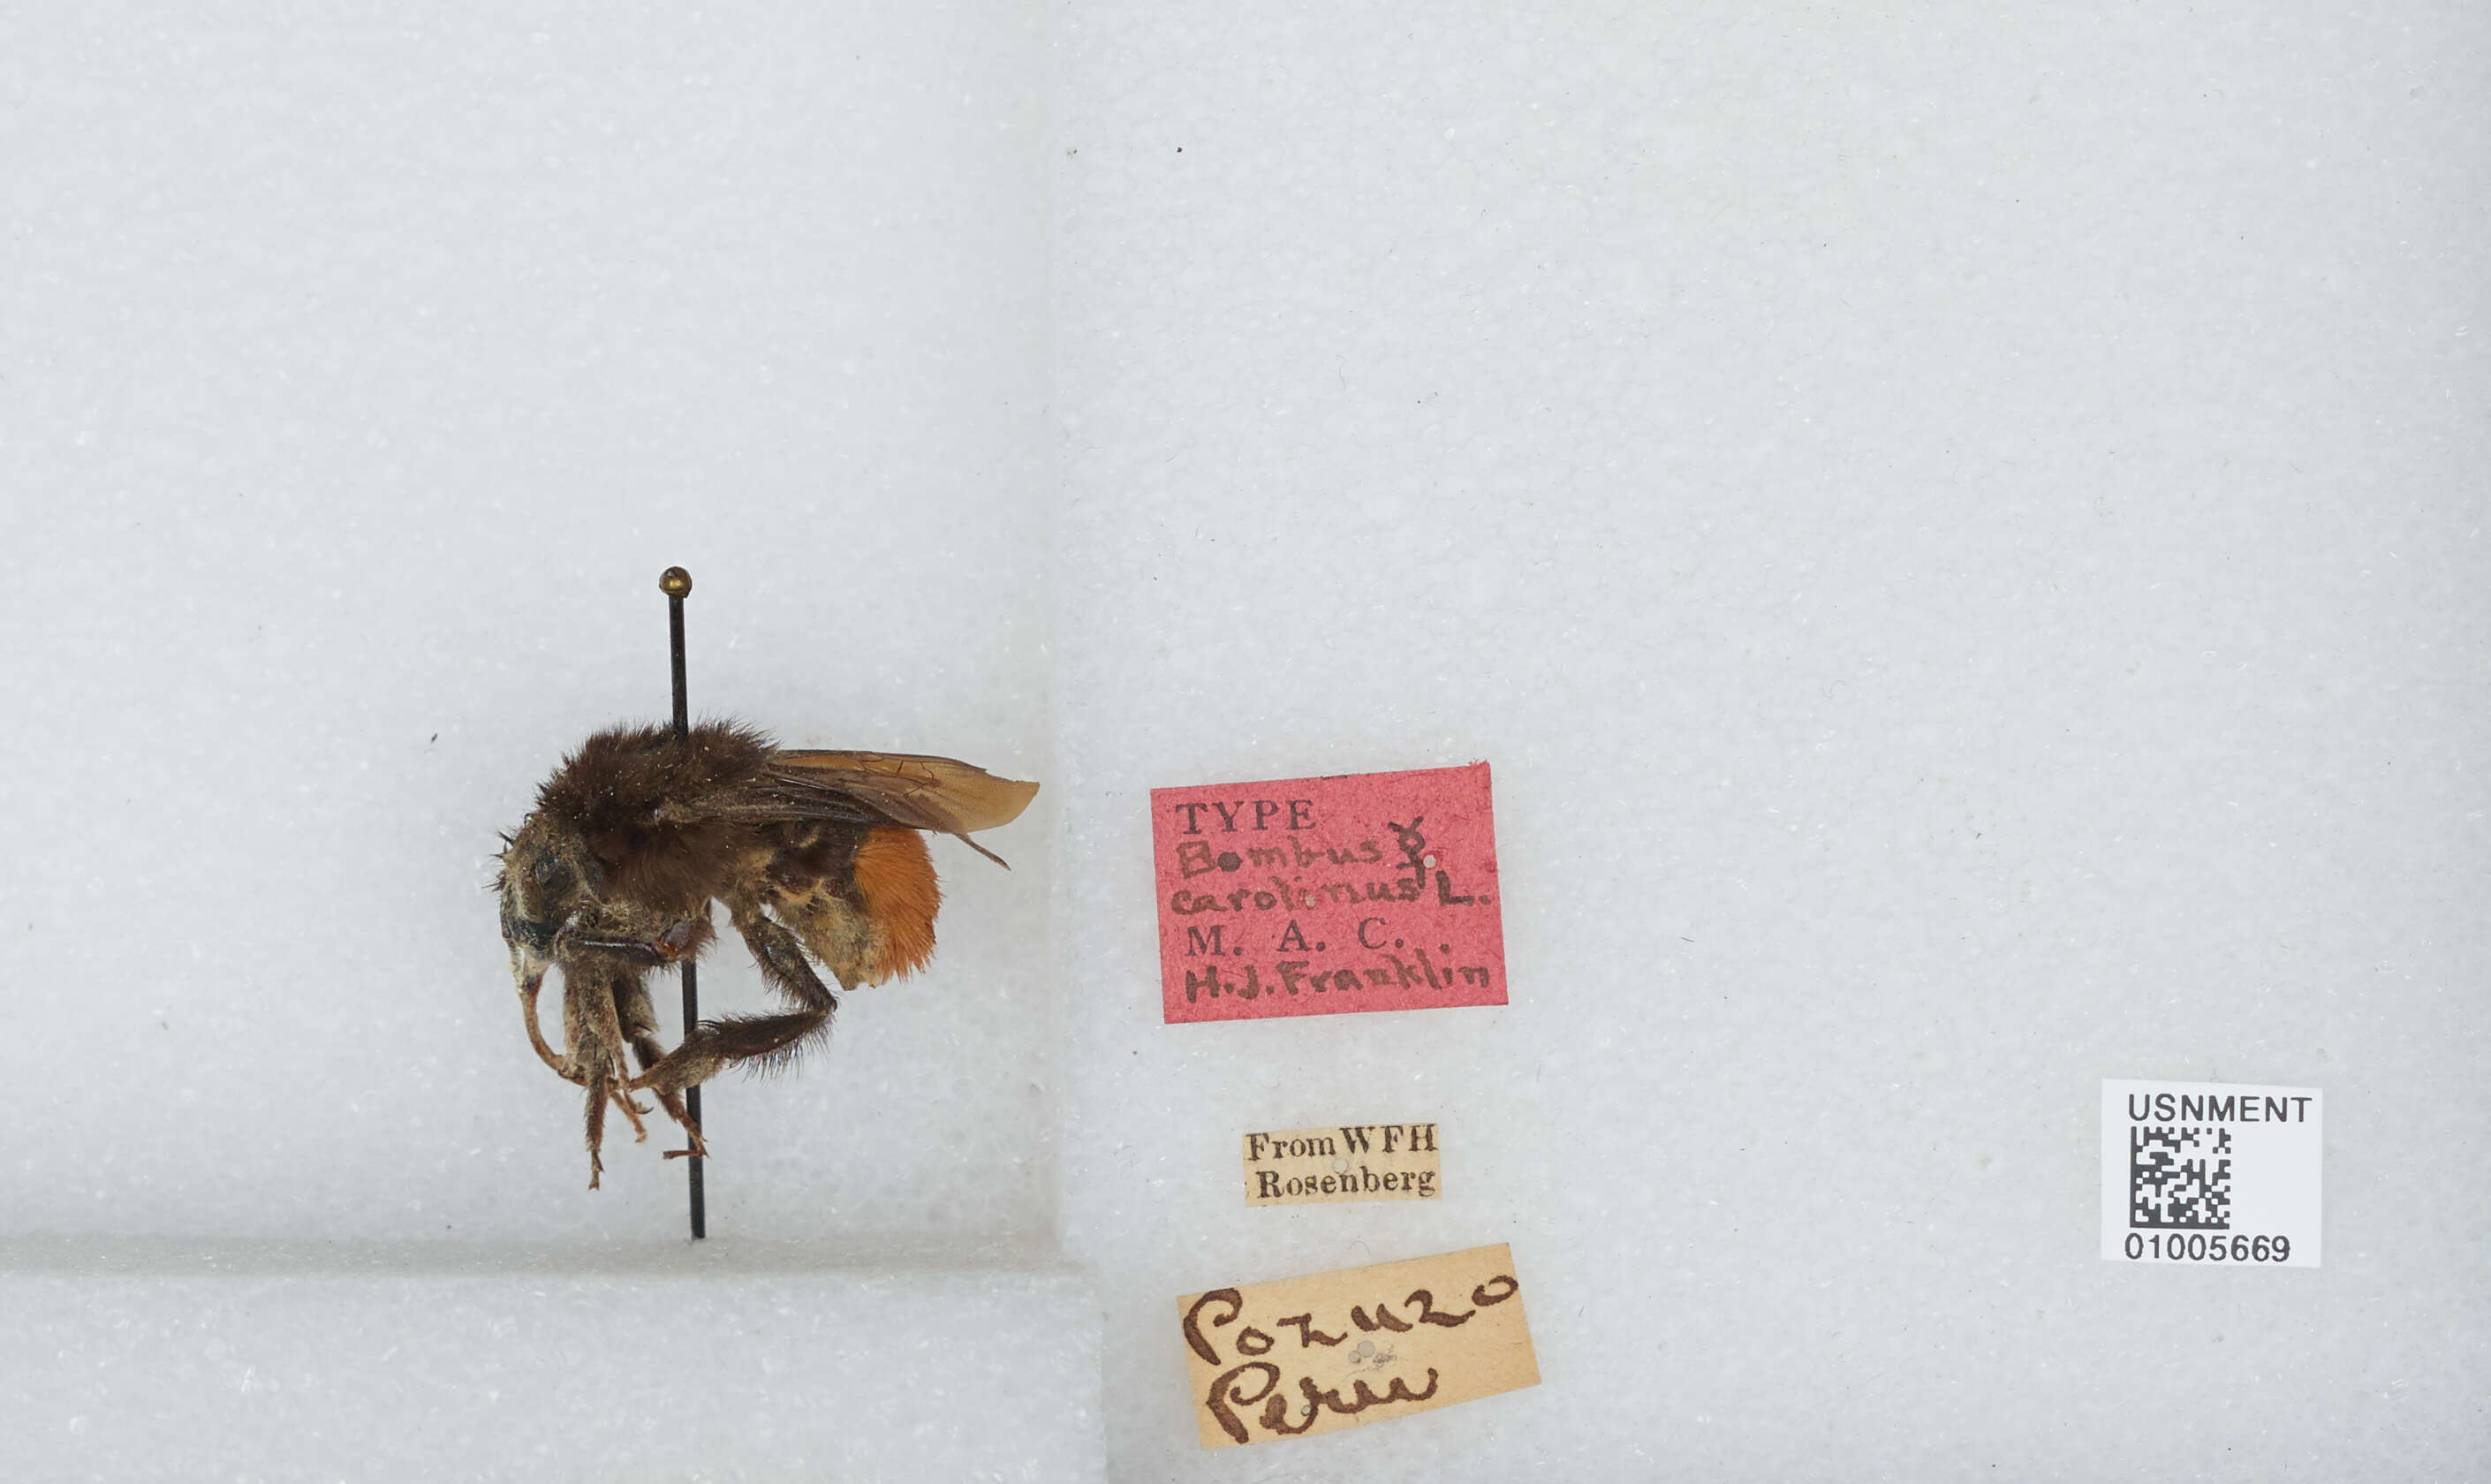 Image of Bombus excellens Smith 1879